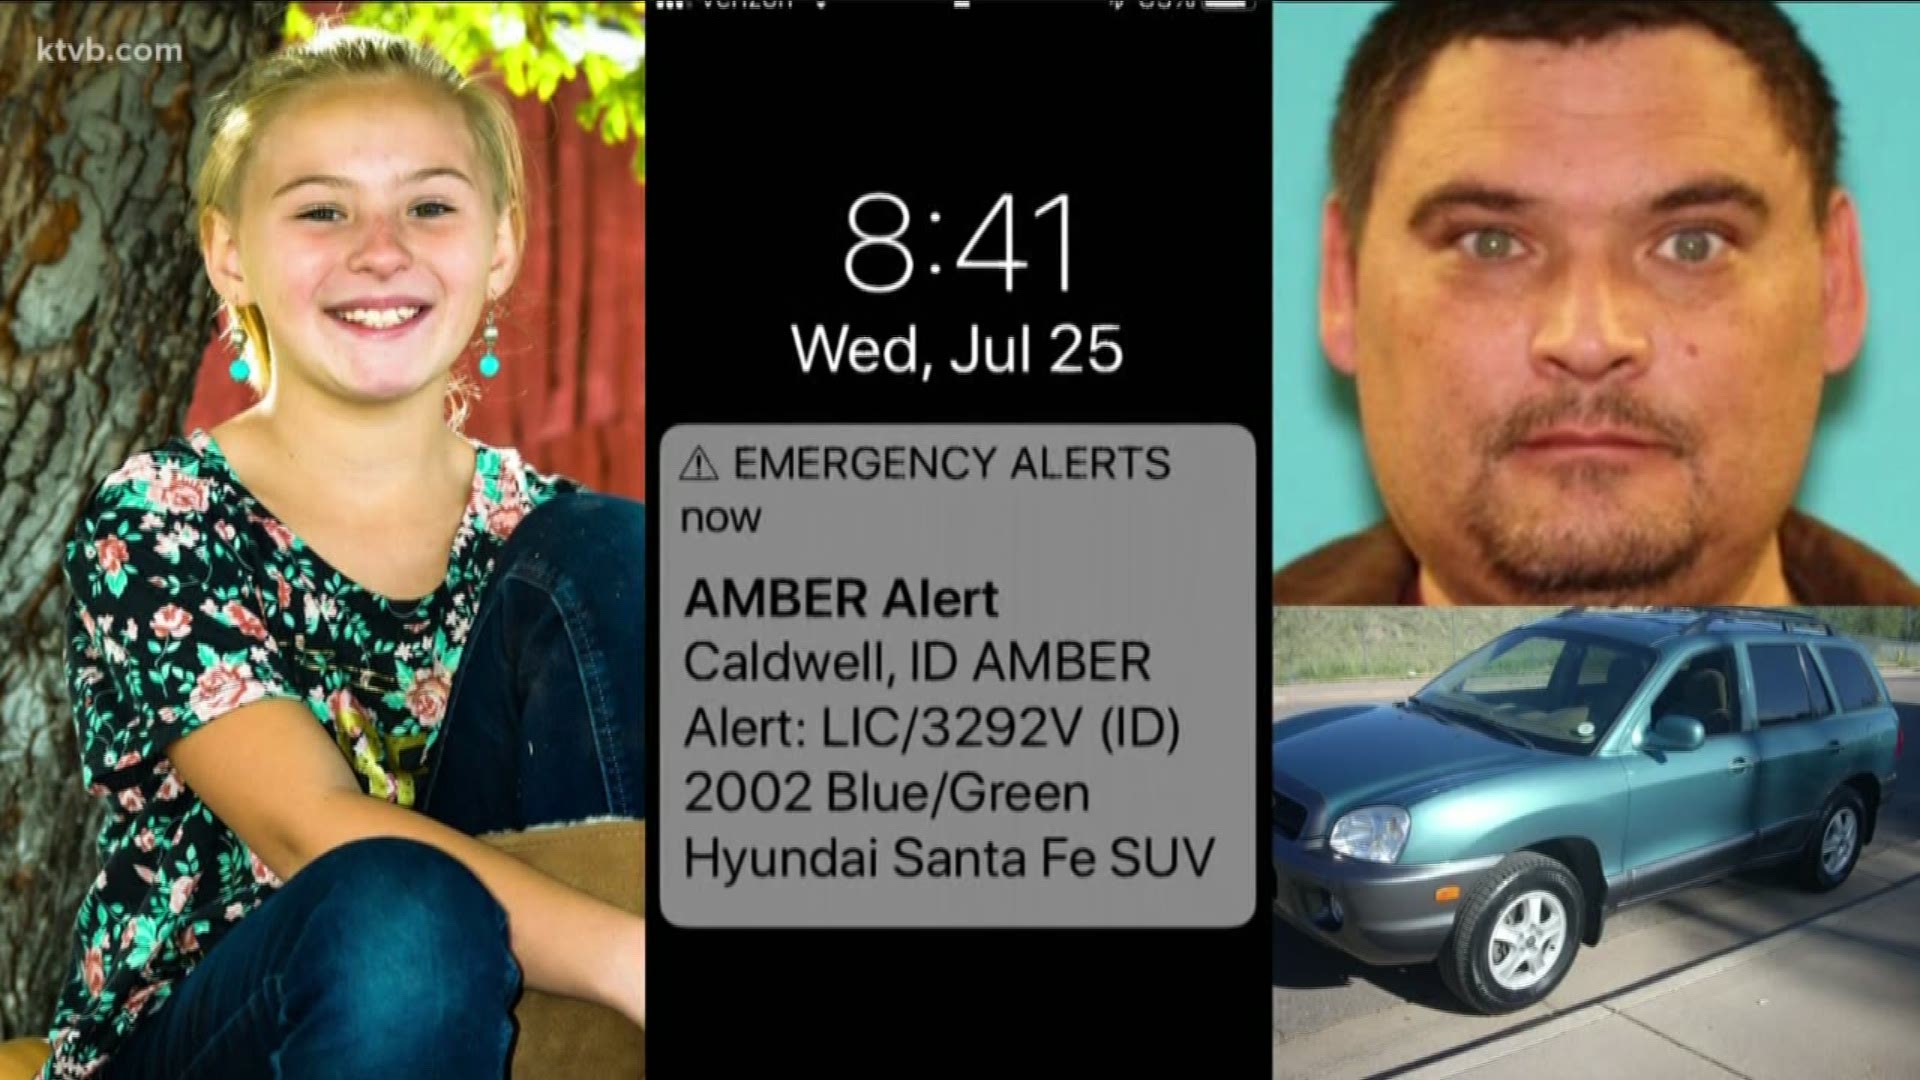 When a child goes missing, here are the criteria for an AMBER Alert